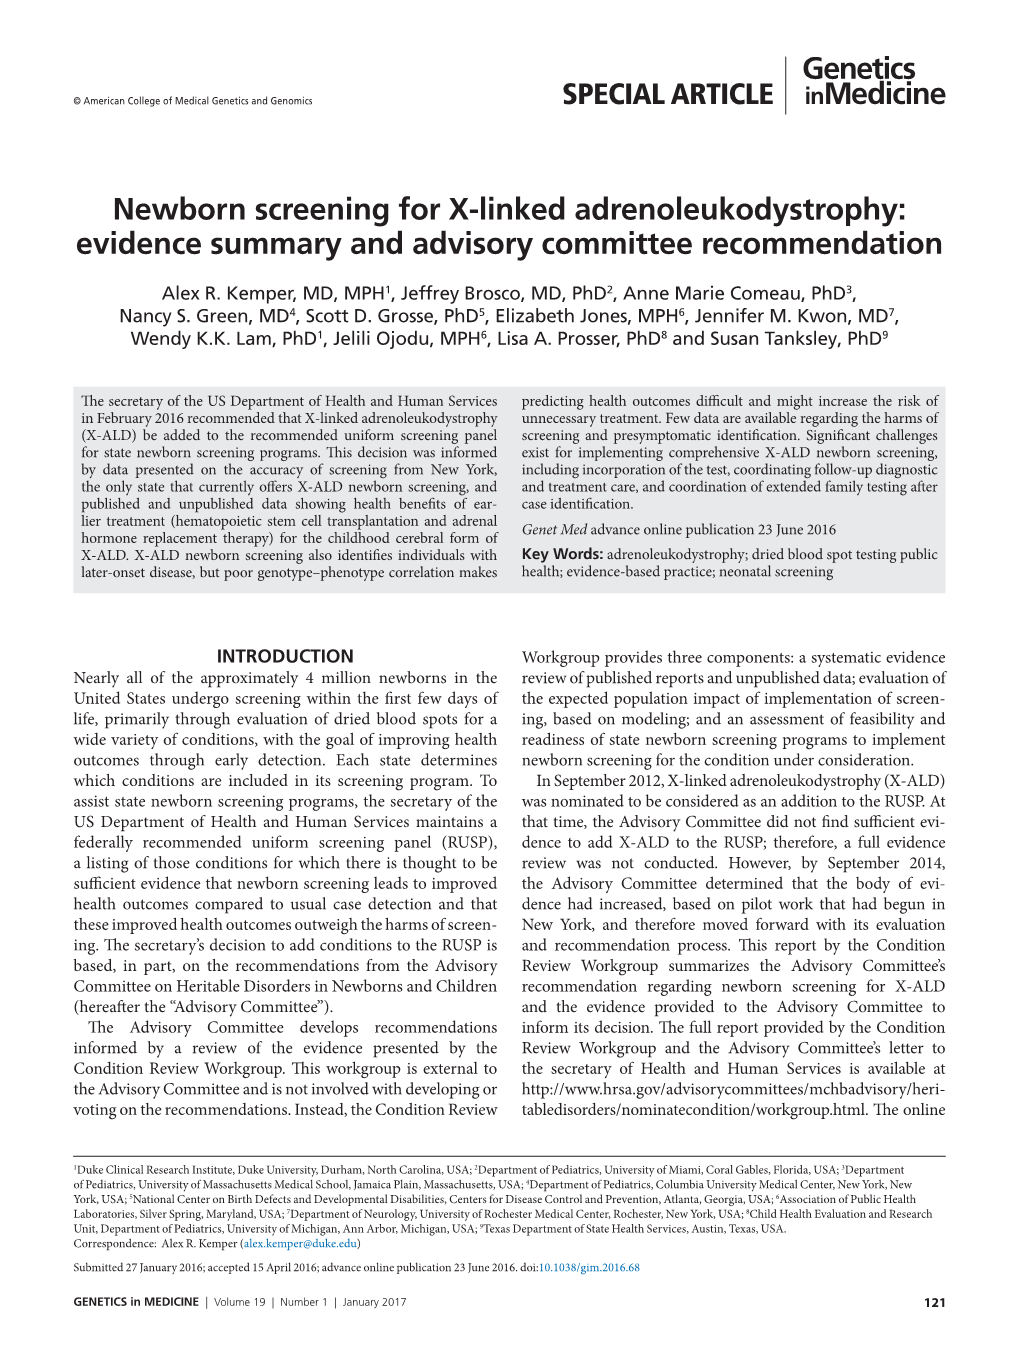 Newborn Screening for X-Linked Adrenoleukodystrophy: Evidence Summary and Advisory Committee Recommendation